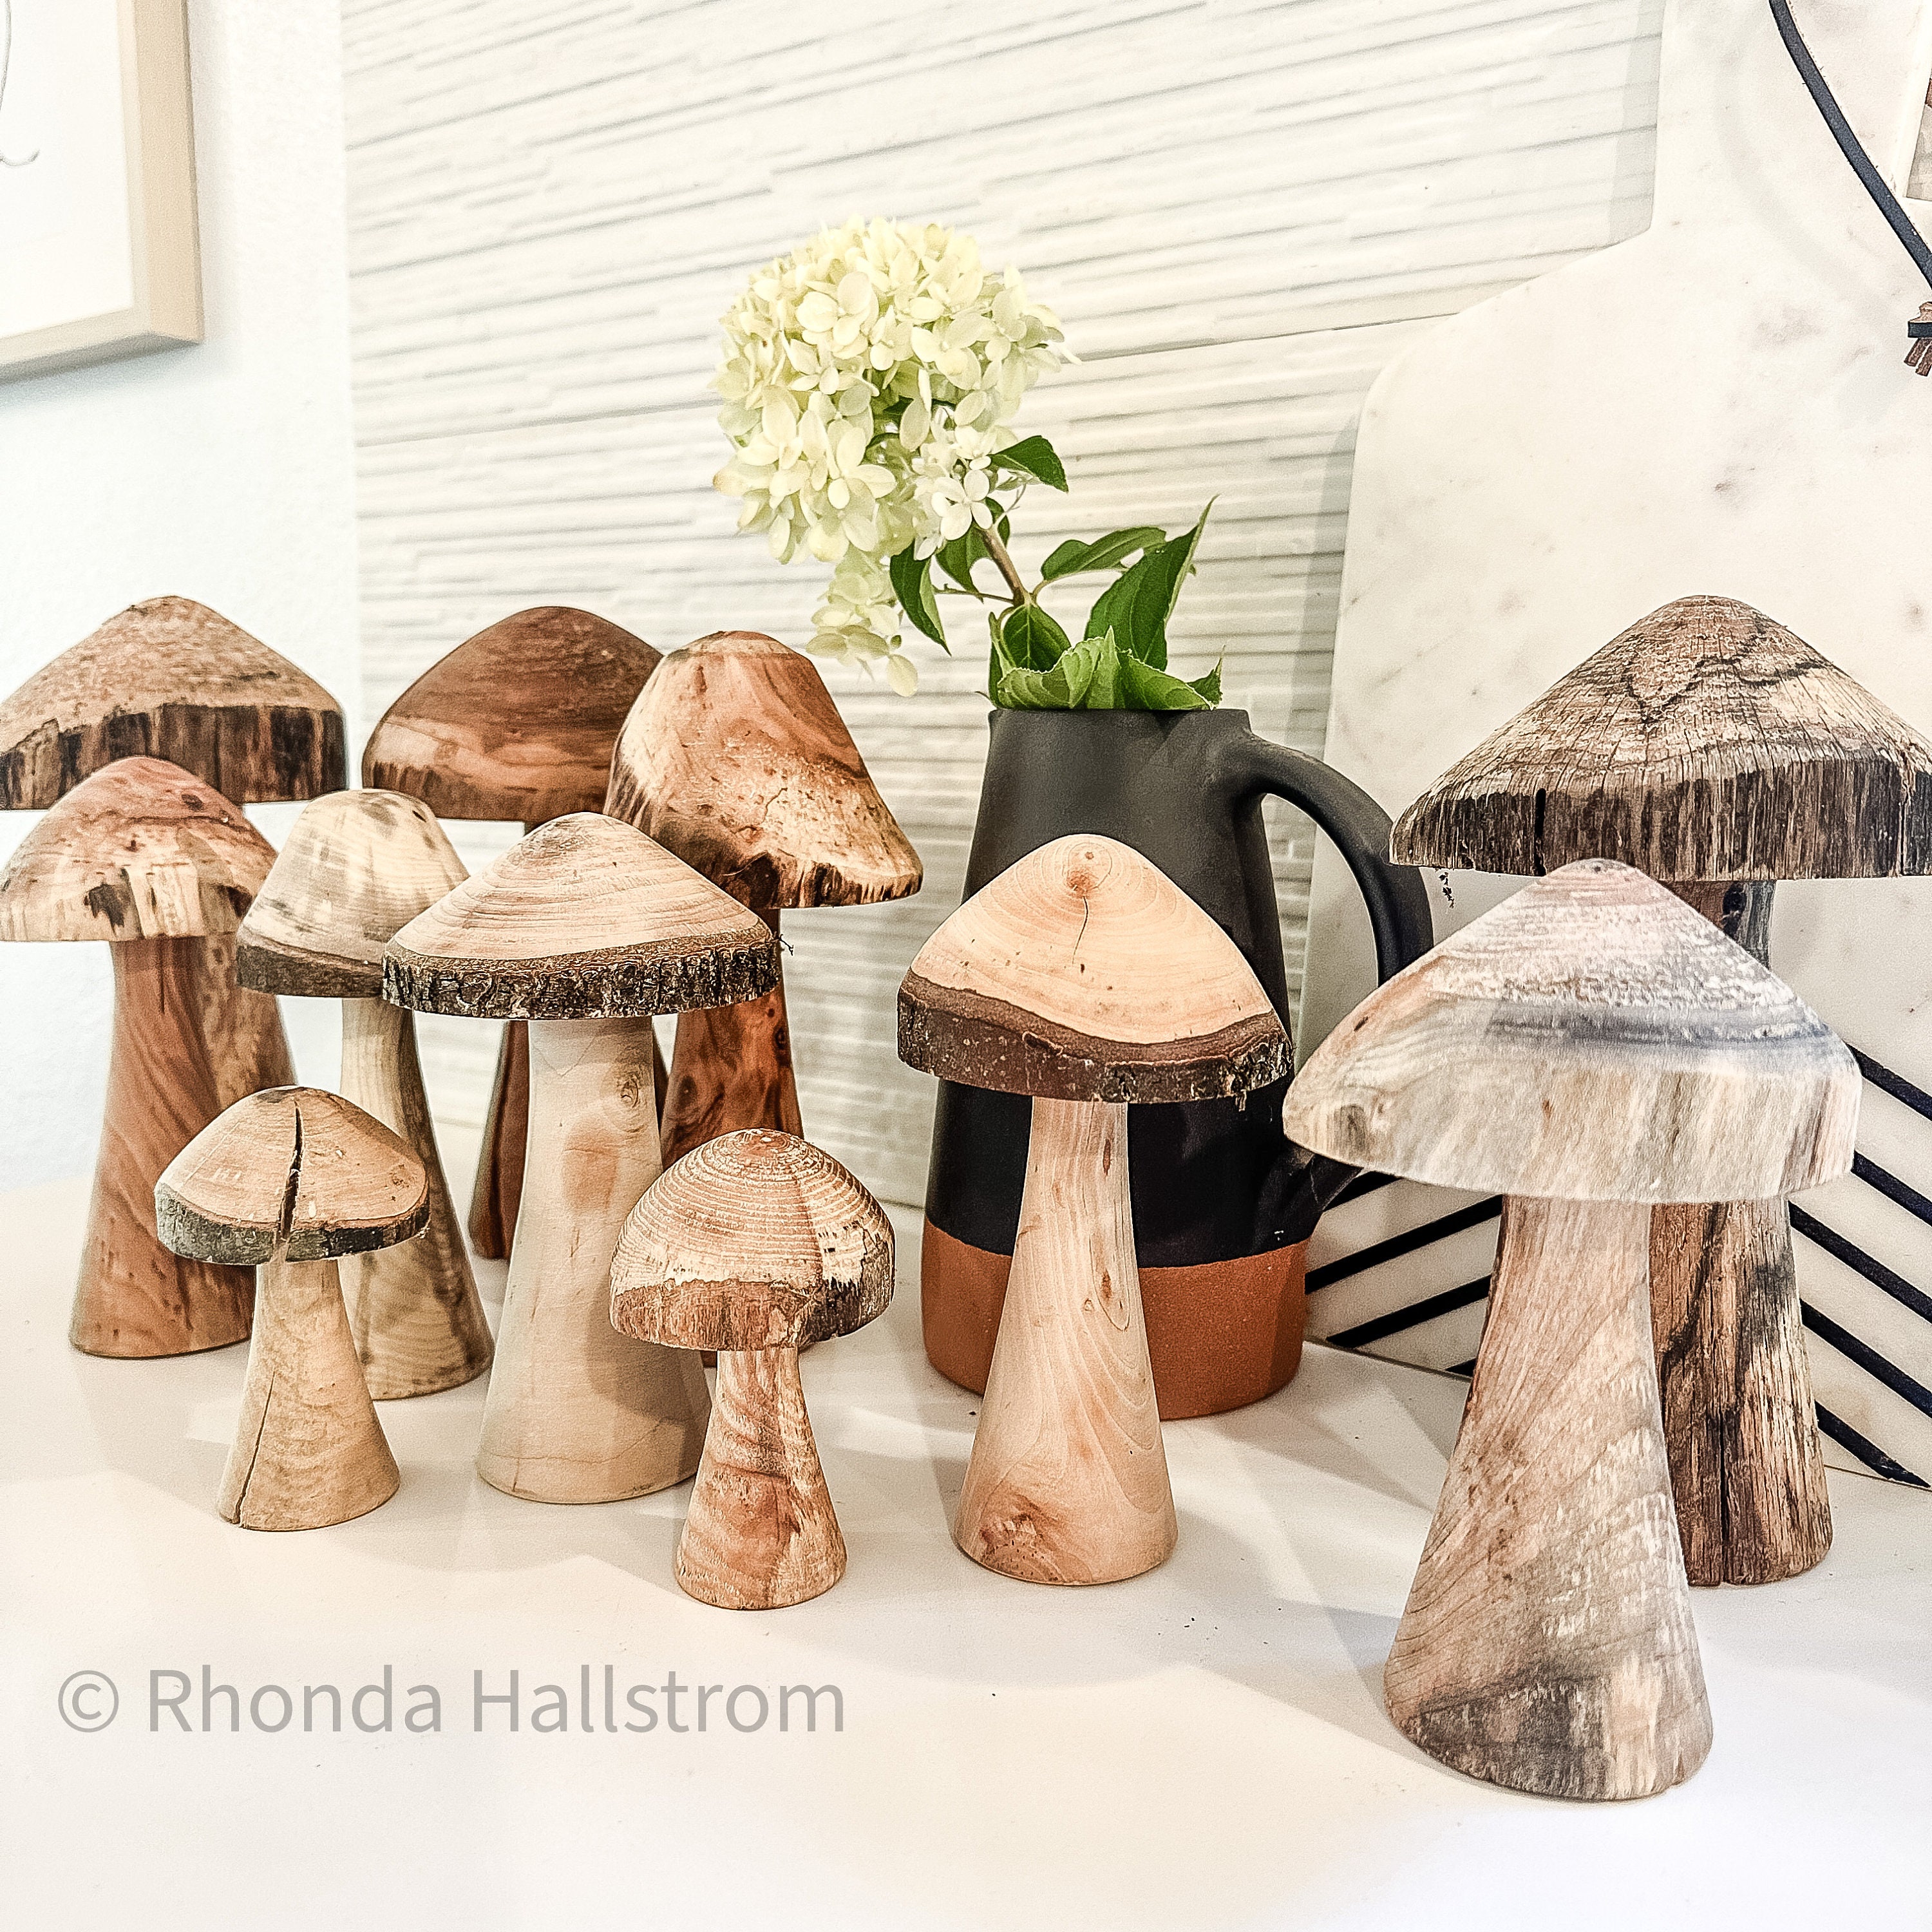 Hand Carved Wooden Mushrooms